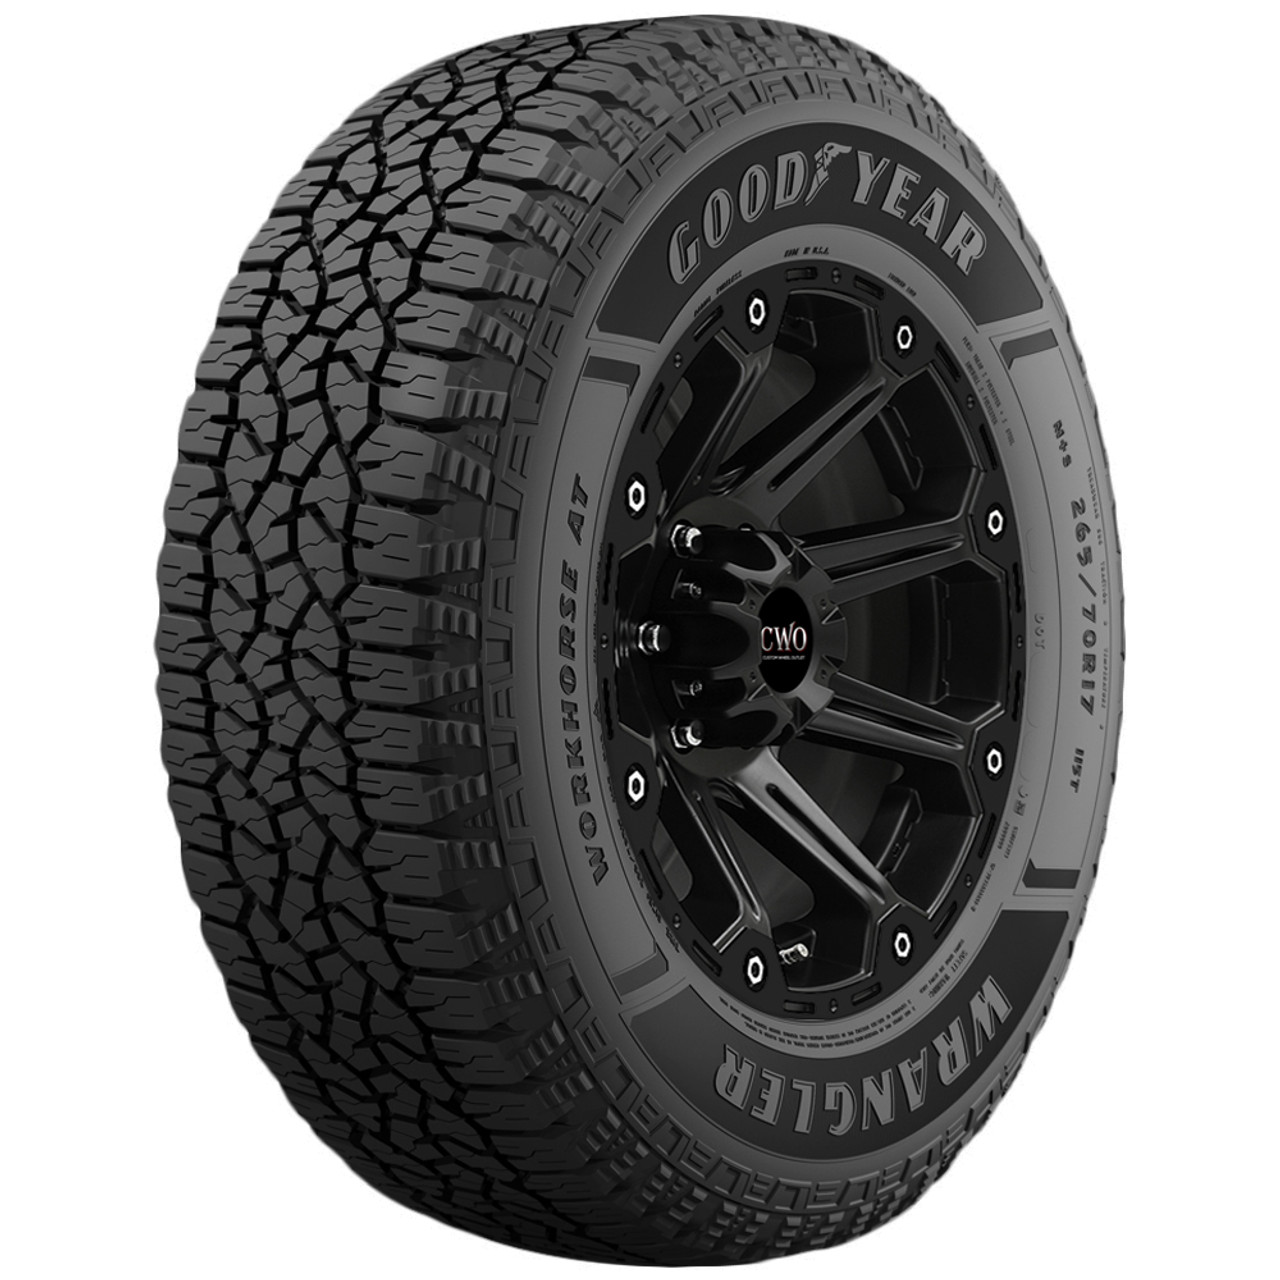 LT225/65R17 Goodyear Wrangler Workhorse AT 107S D/8 Ply Tire 481267855 -  ShopCWO